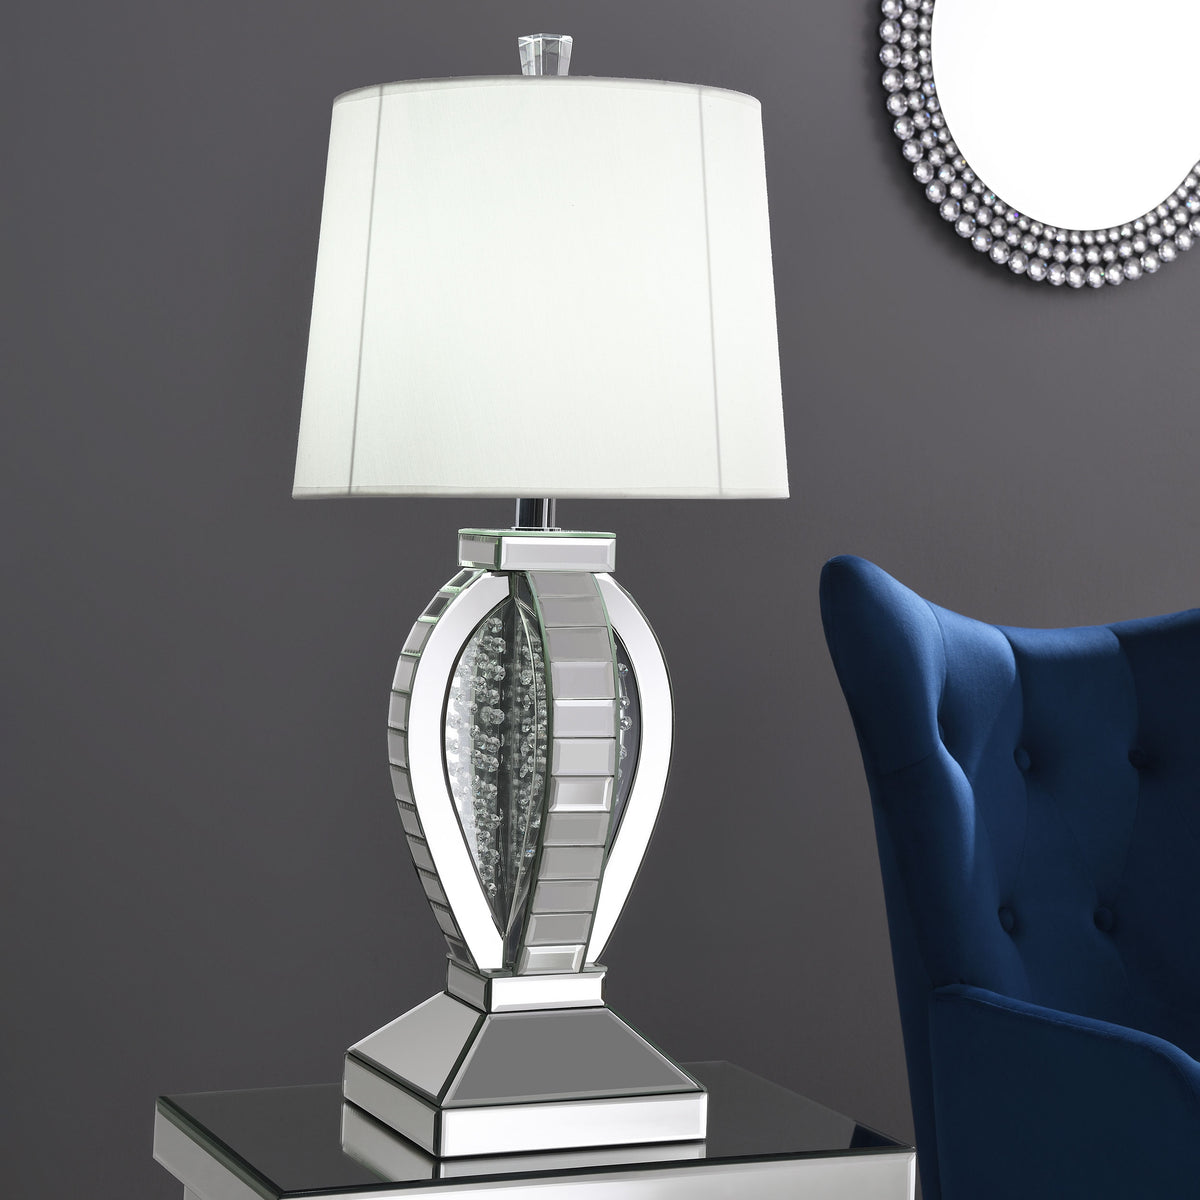 Klein Table Lamp with Drum Shade White and Mirror Klein Table Lamp with Drum Shade White and Mirror Half Price Furniture